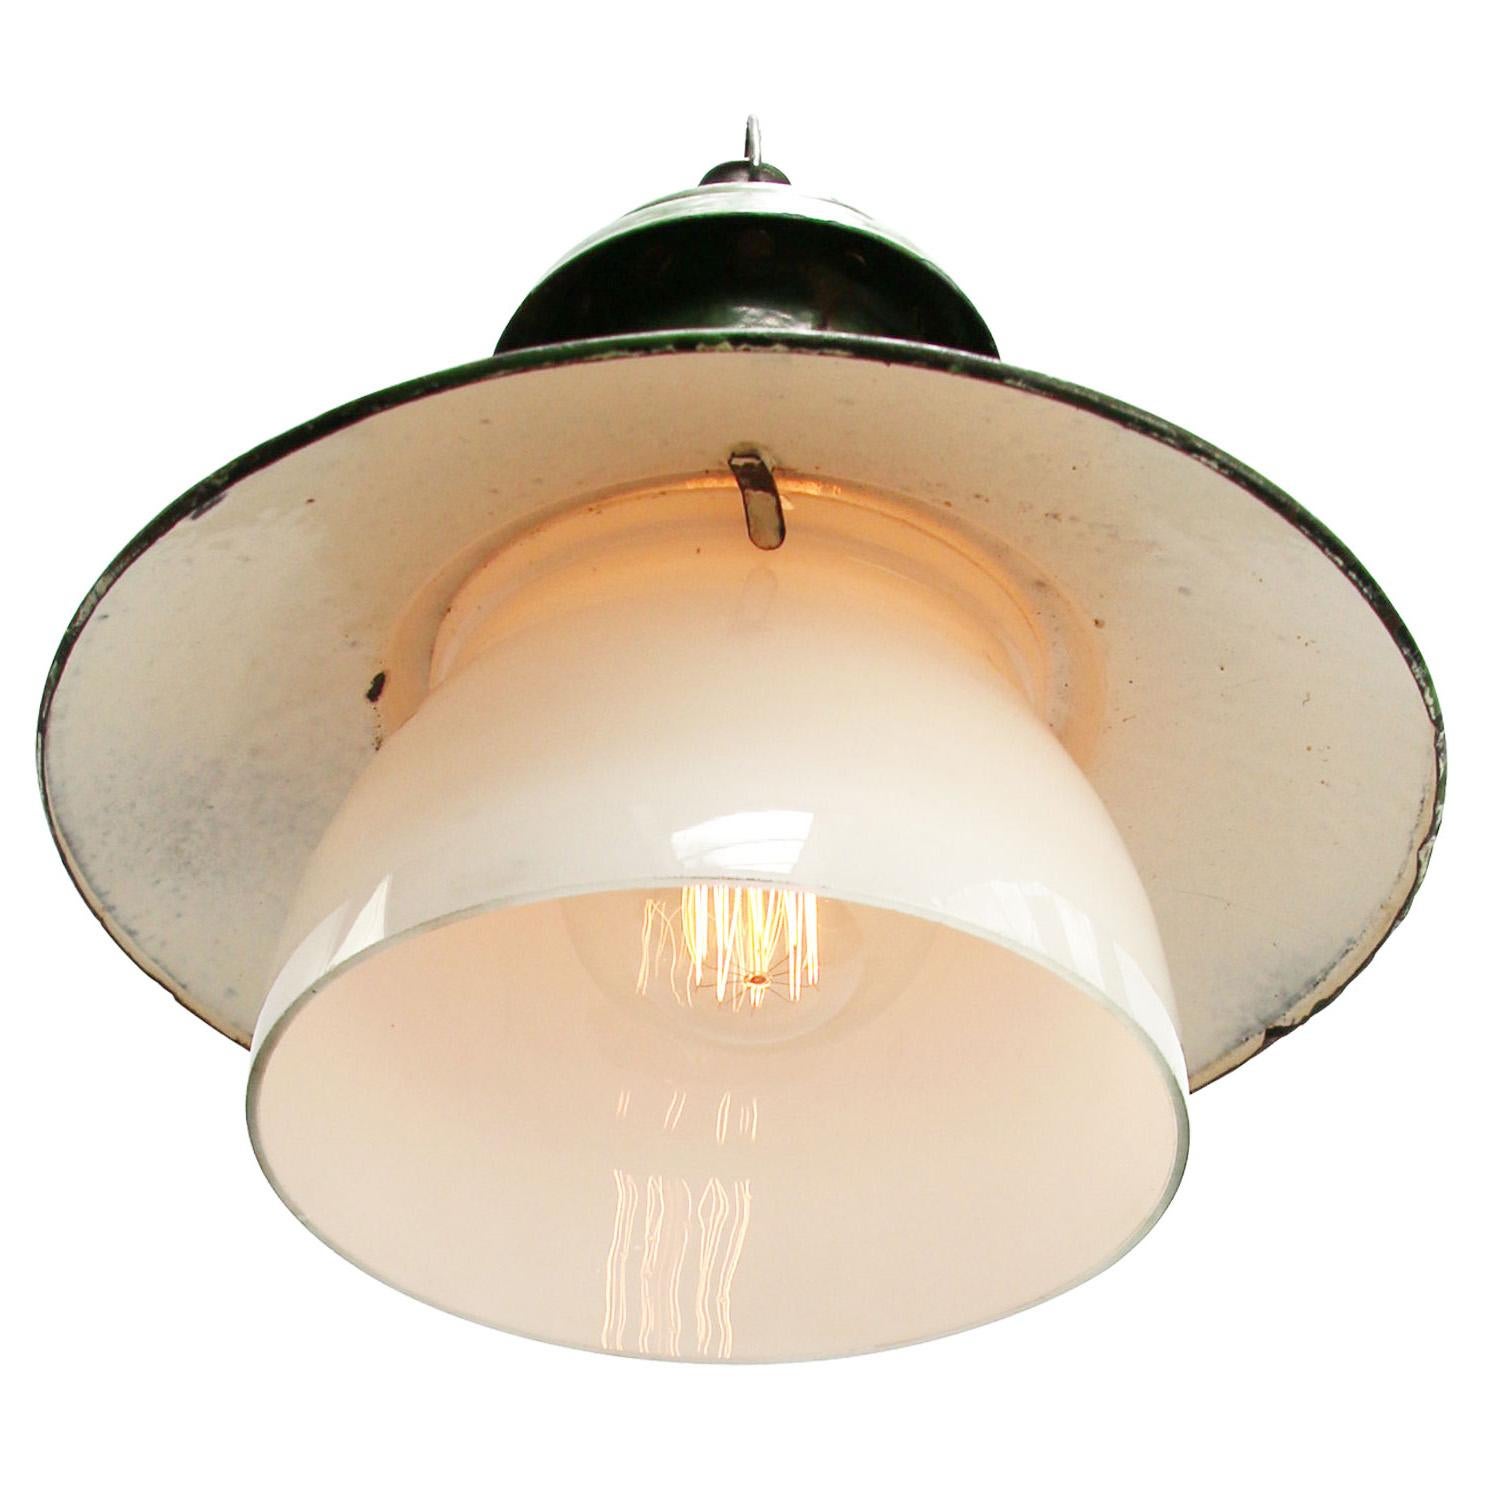 Green enamel factory pendant.
White inside. White opaline glass

Measure: Diameter glass 21 cm

Weight: 2.20 kg / 4.9 lb

Priced per individual item. All lamps have been made suitable by international standards for incandescent light bulbs,